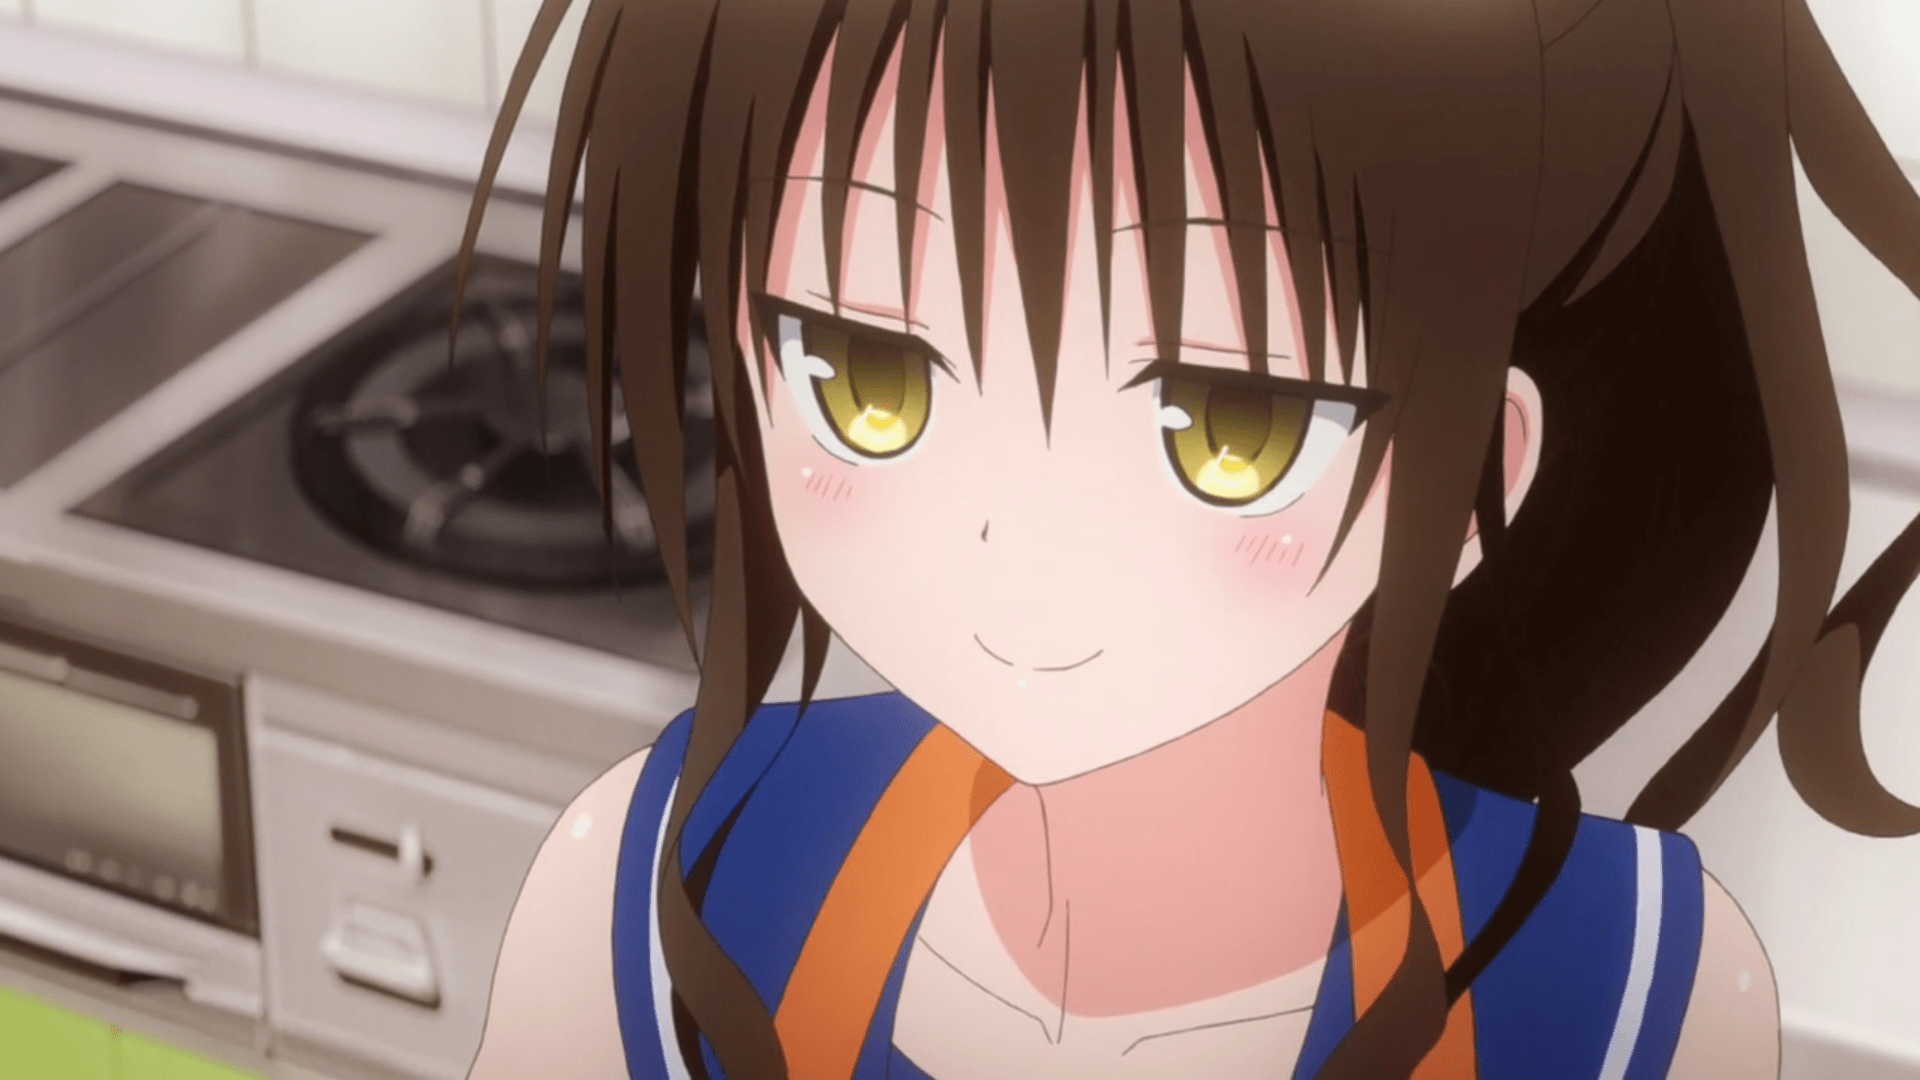 anime smug faces wallpapers wallpaper cave on anime smug faces wallpapers